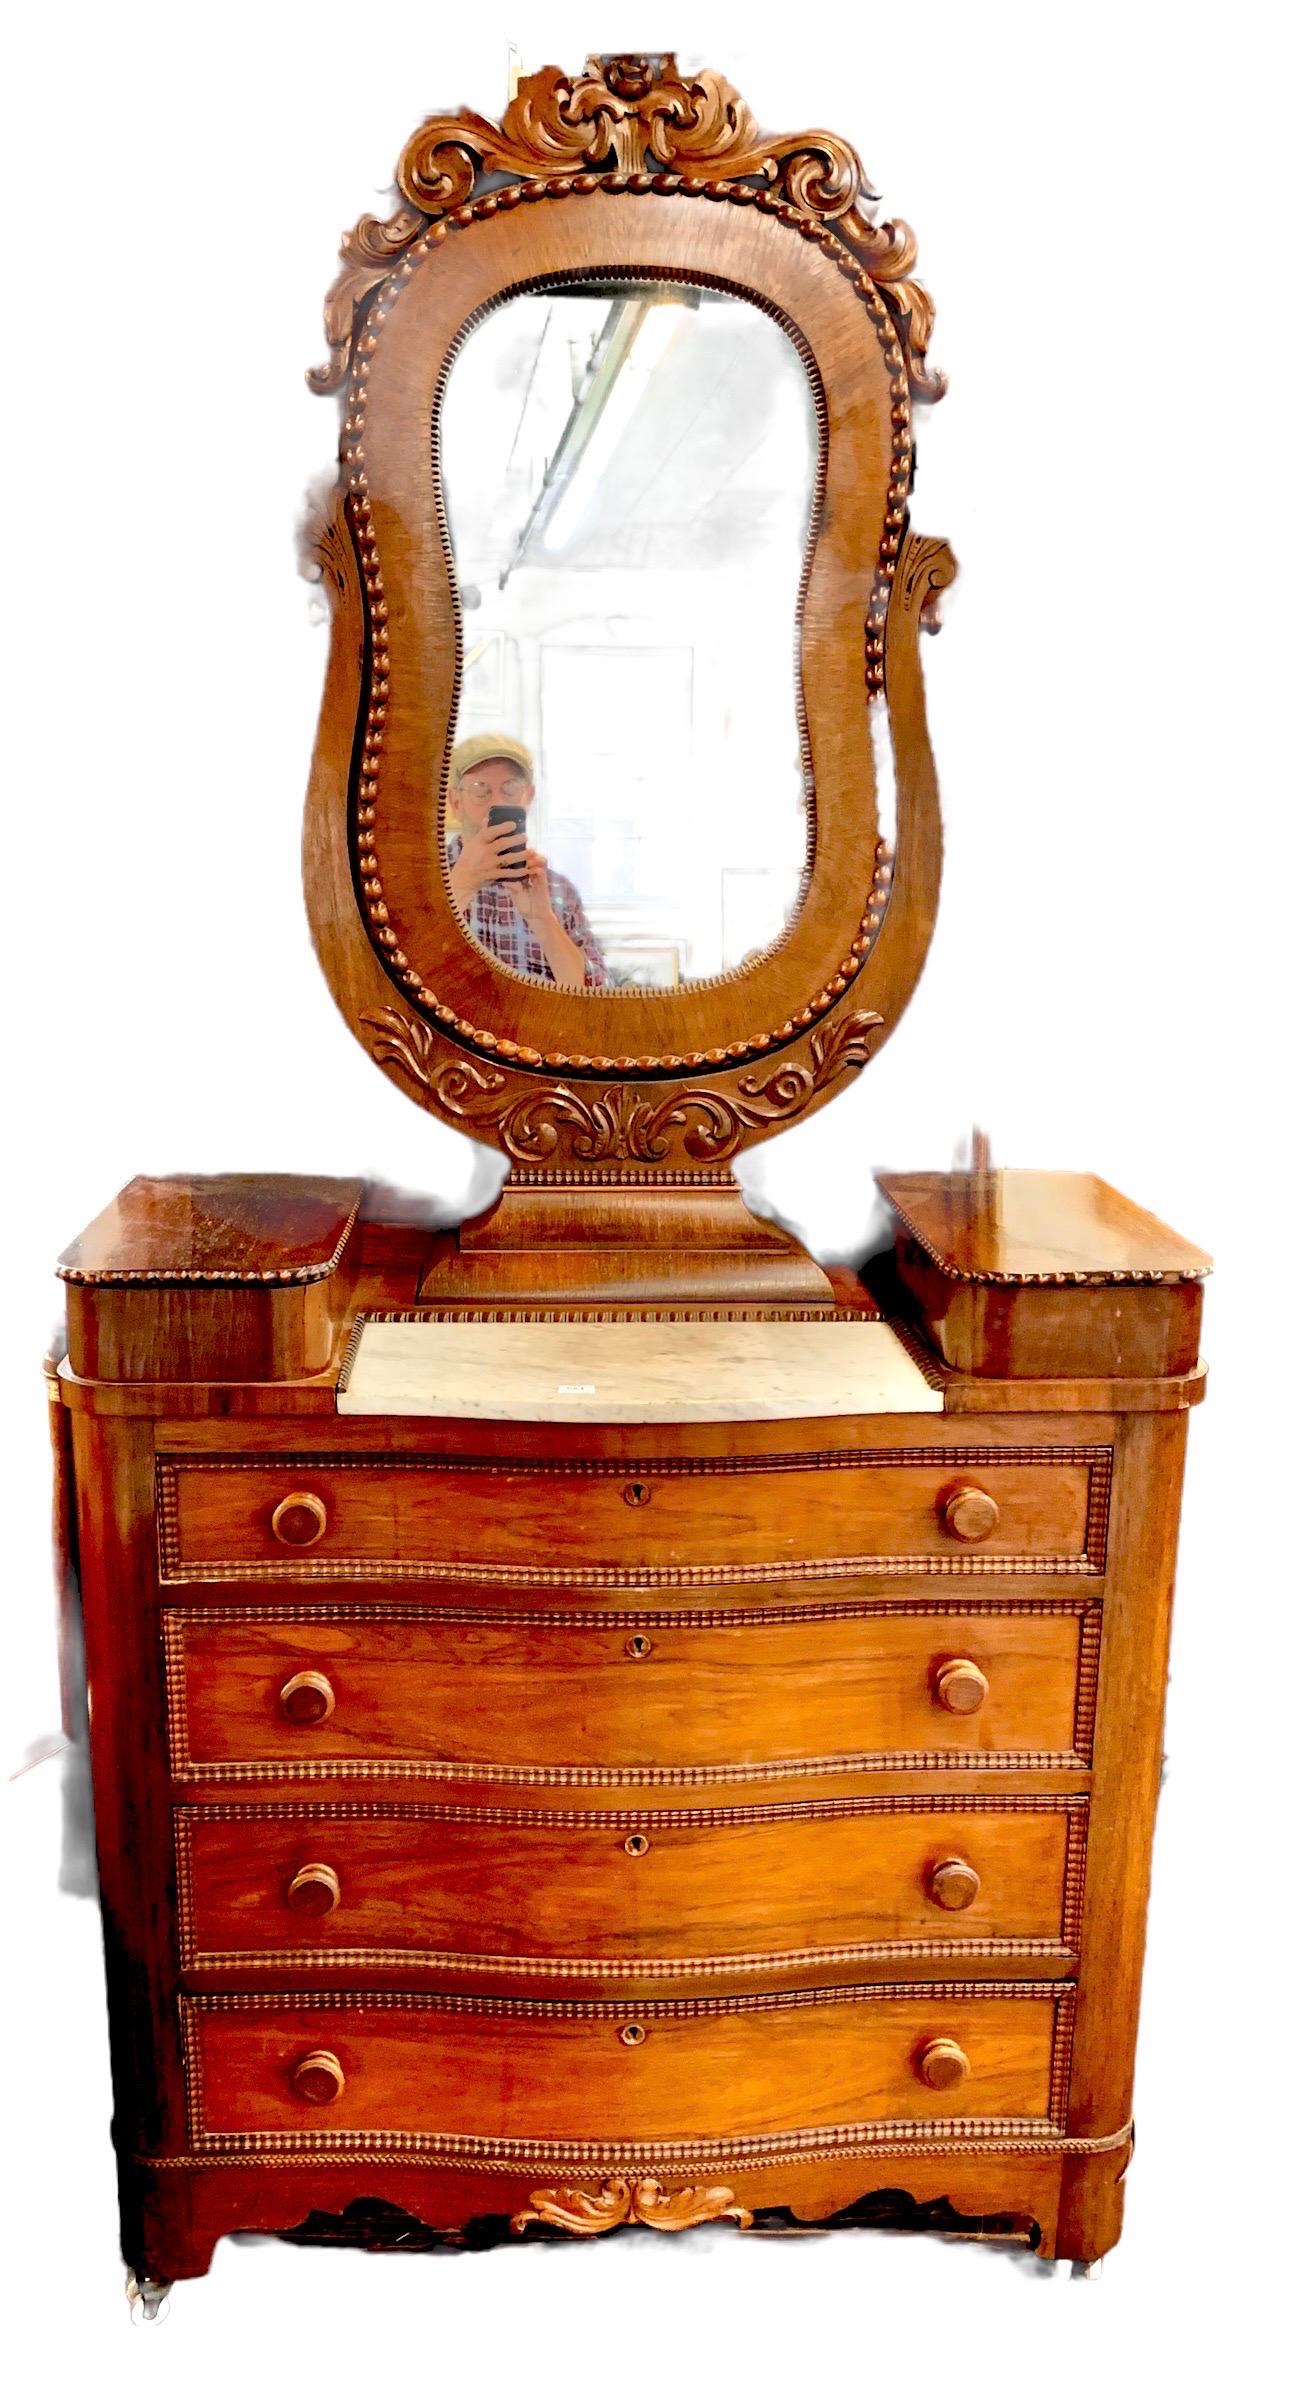 Hand-Carved Antique American Classical Period Carved Rosewood Dresser with Yoke Mirror